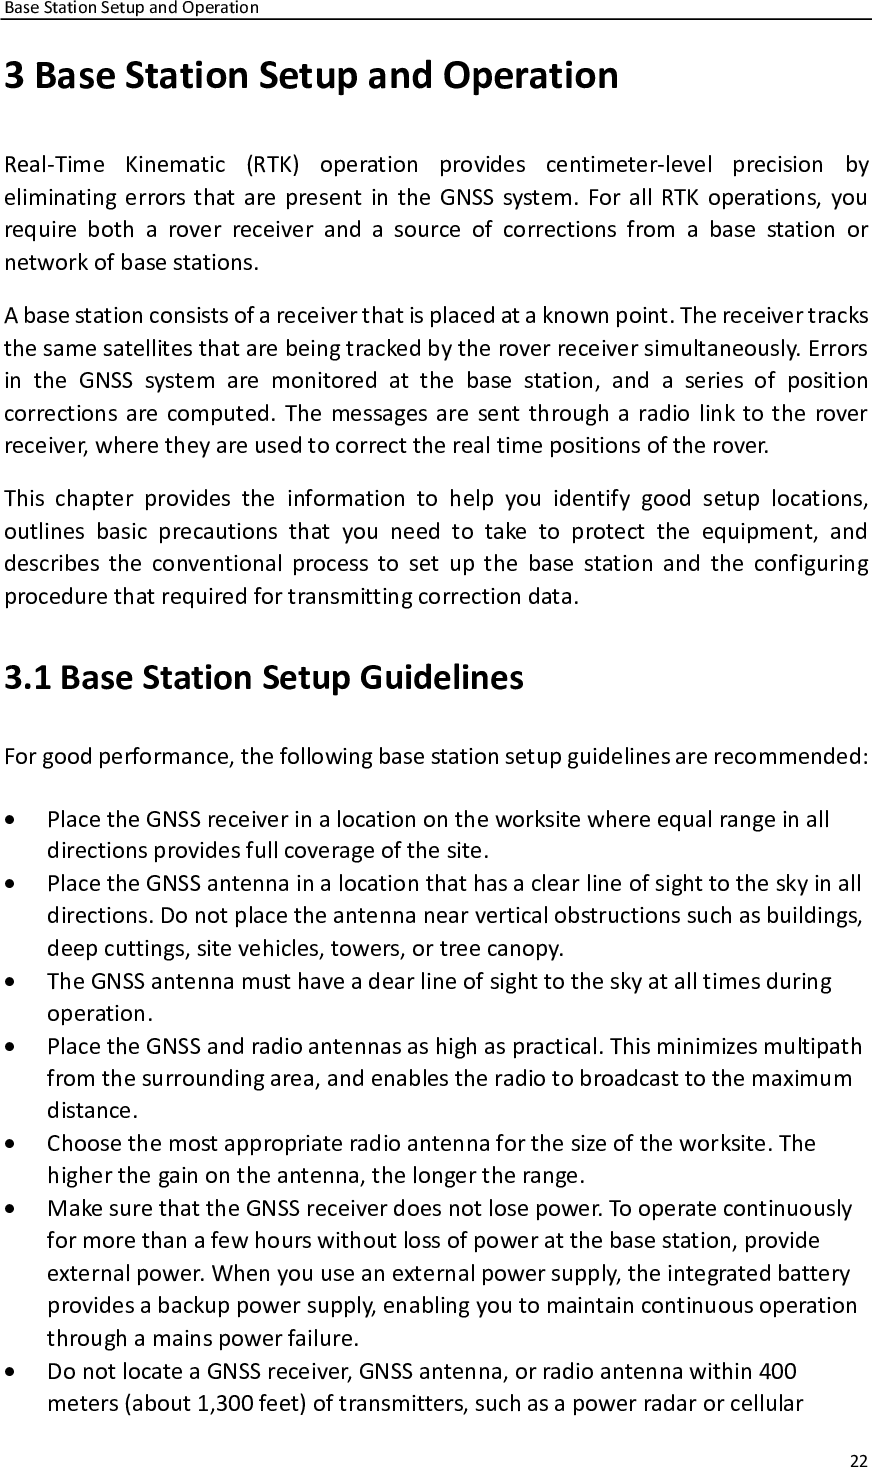 Page 22 of Huace Navigation Technology A01013 Geodetic GNSS Receiver E91 User Manual